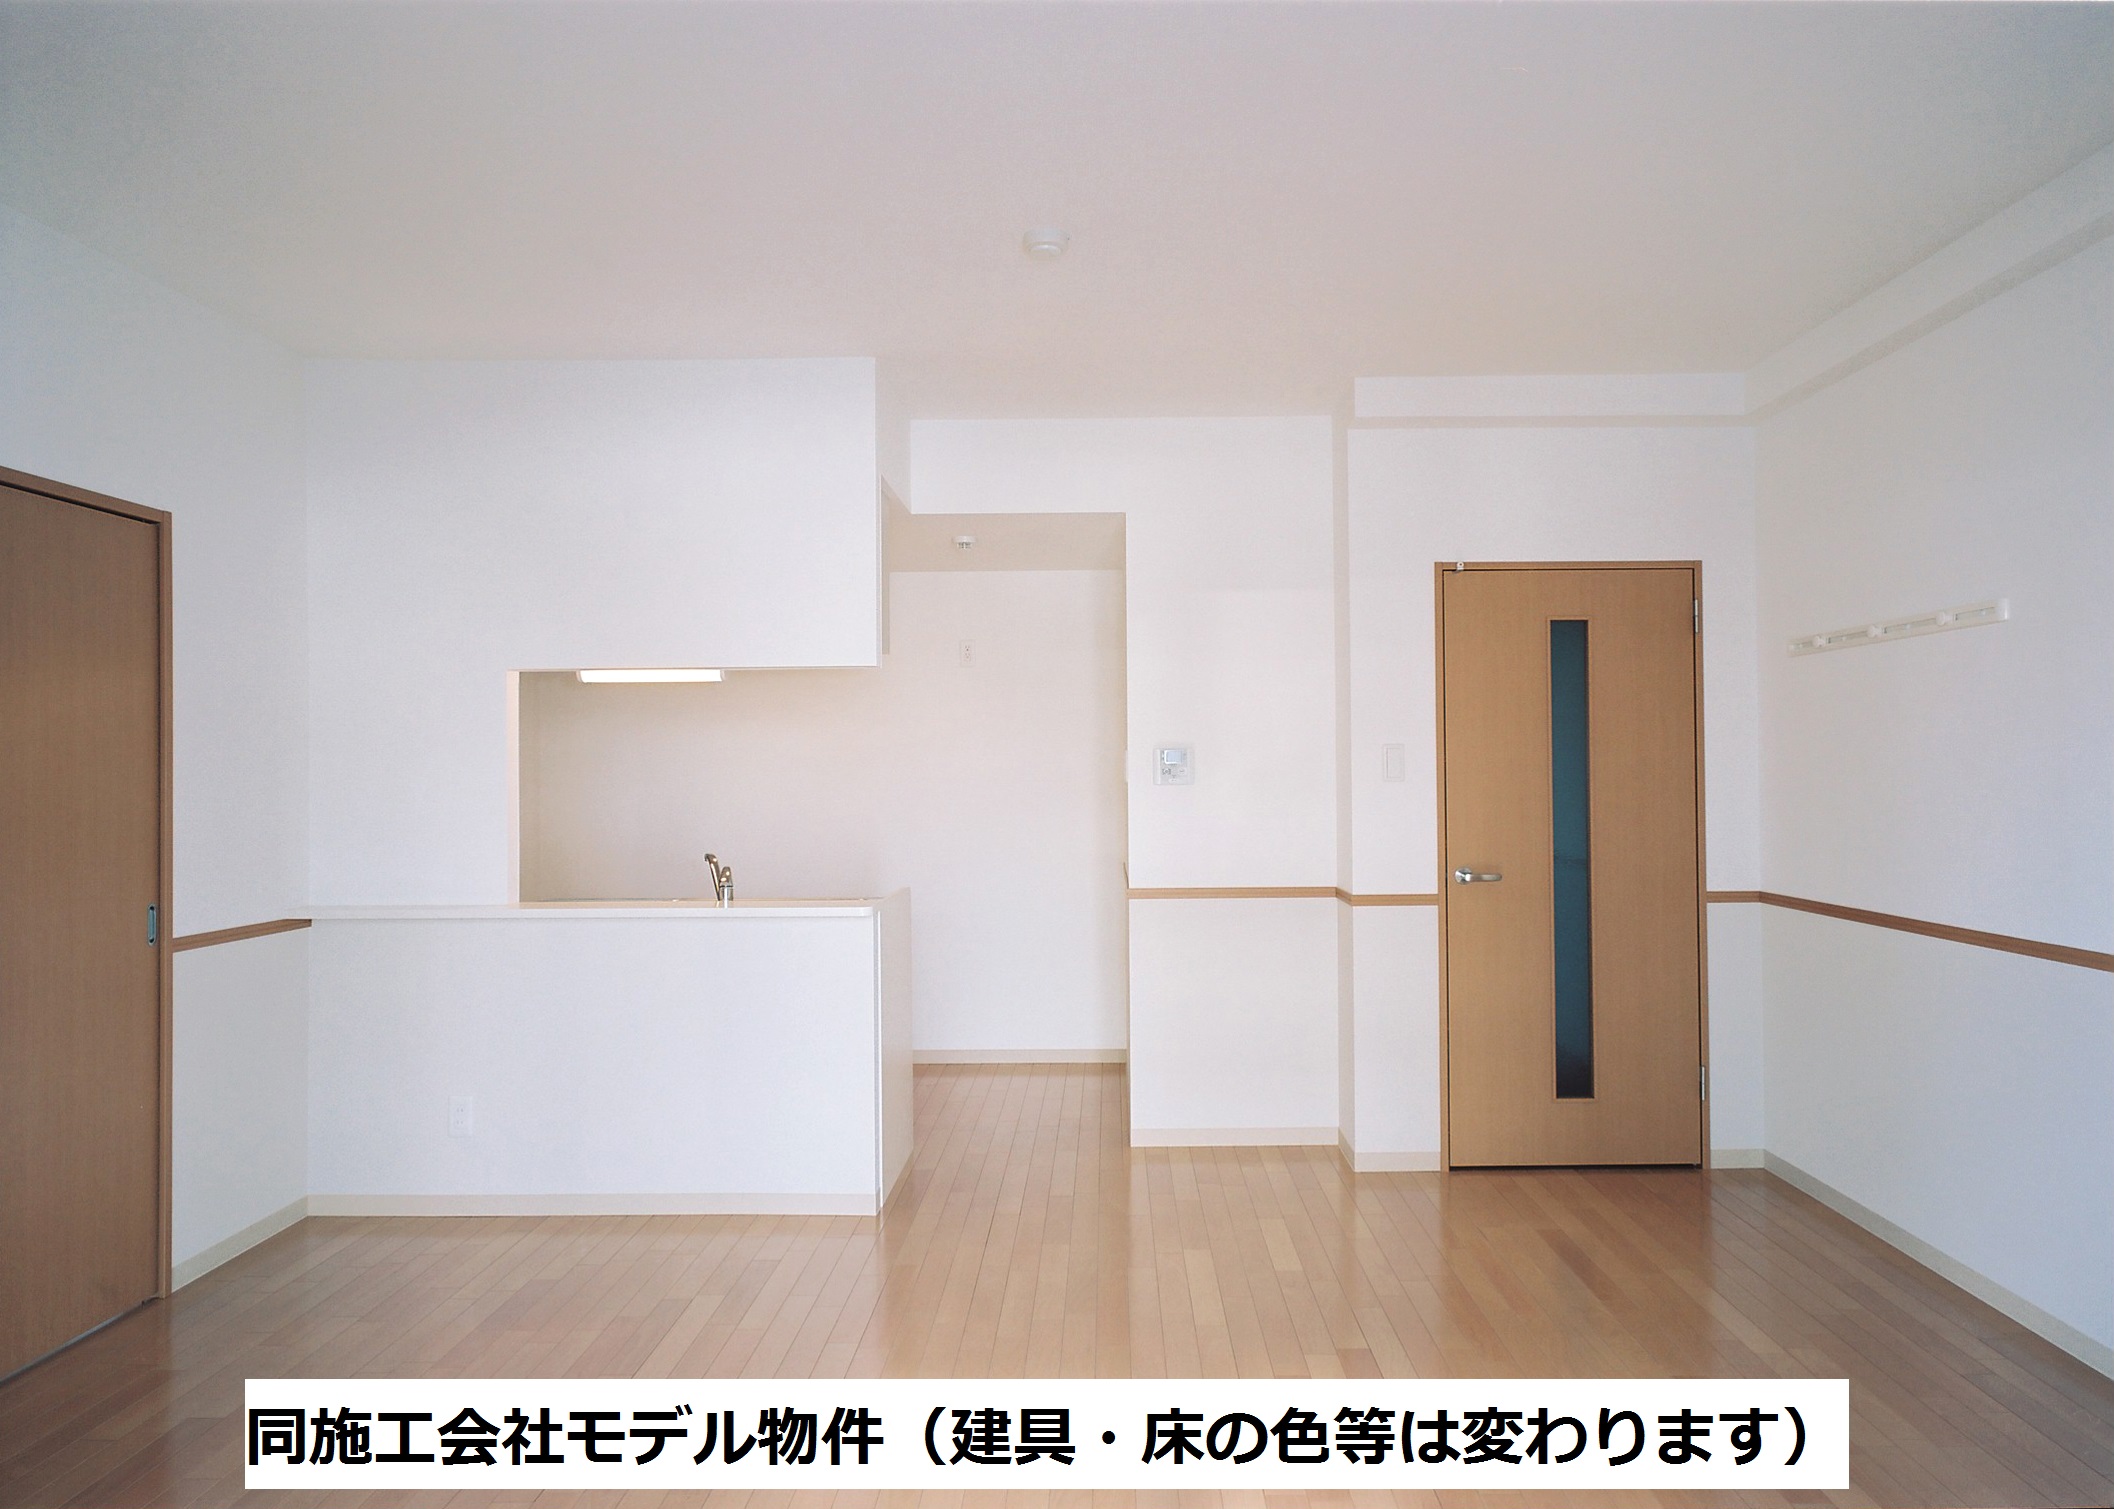 Living and room. Same construction company model properties floor ・ It will change color, such as joinery